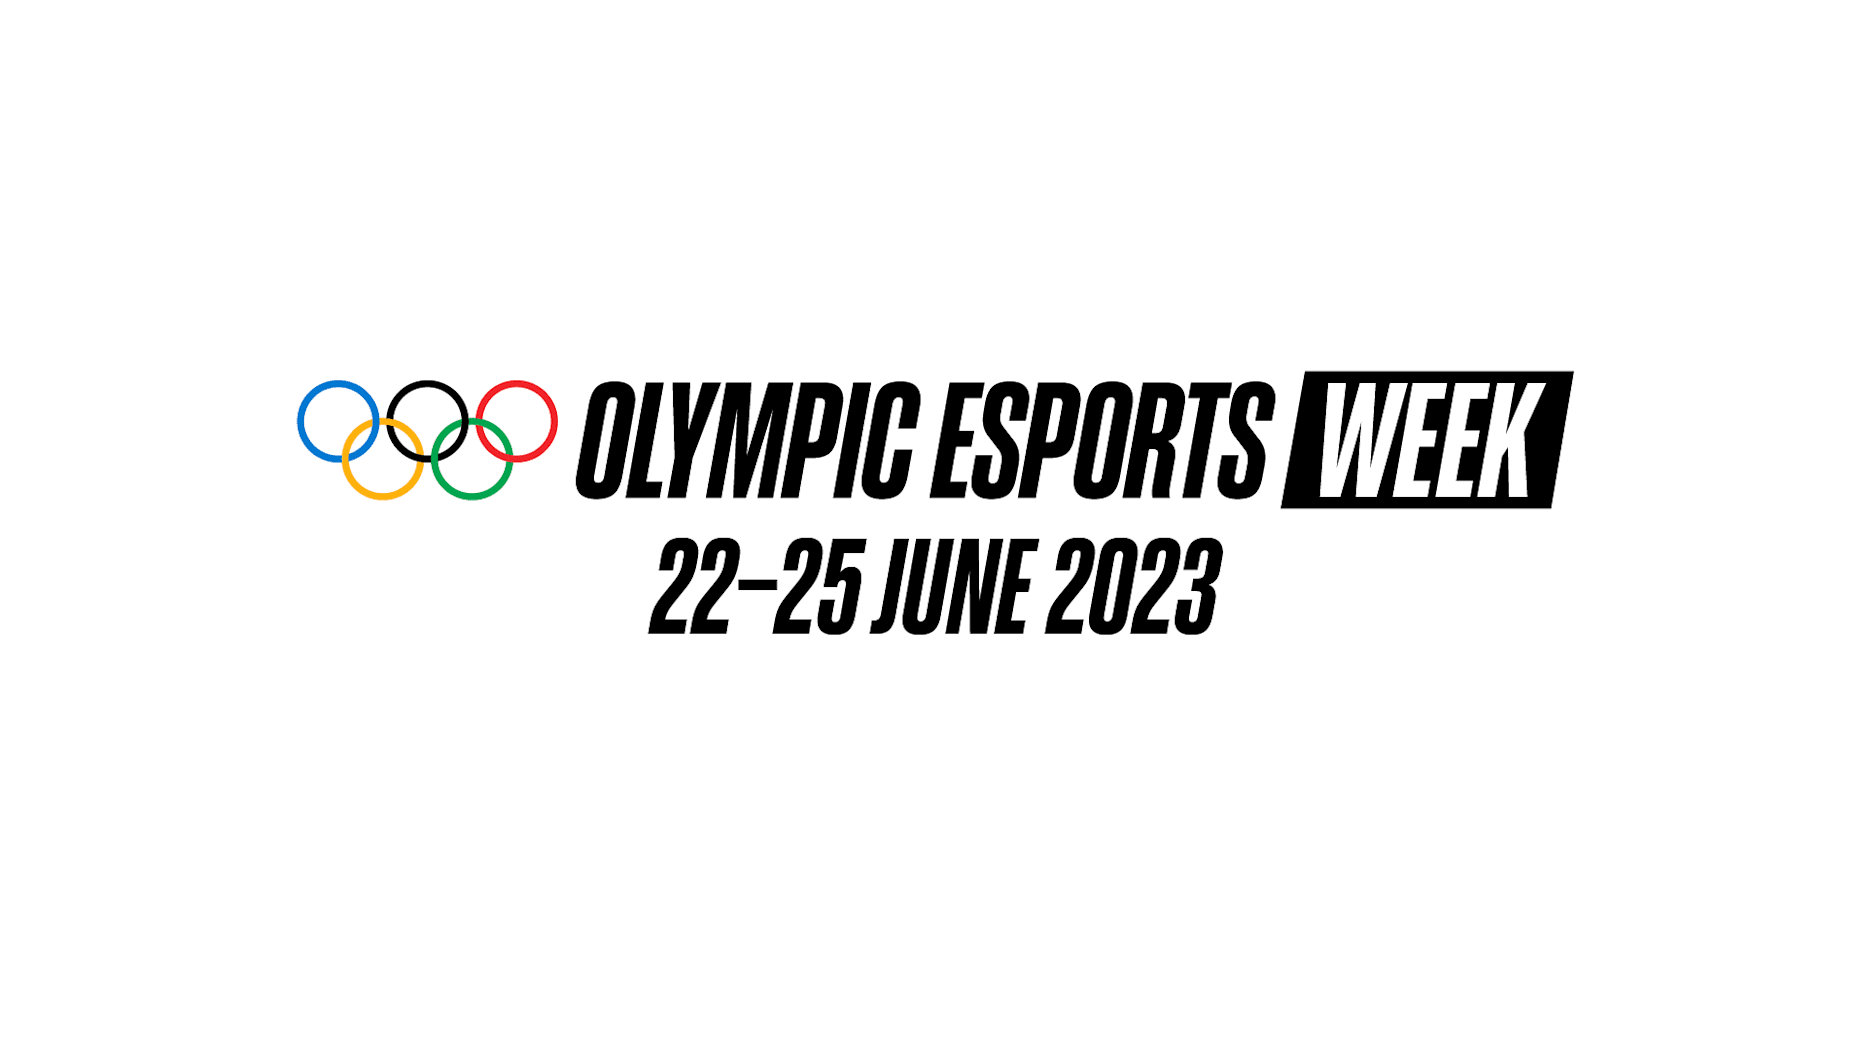 Singapore to host inaugural edition of Olympic Esports Week in June 2023